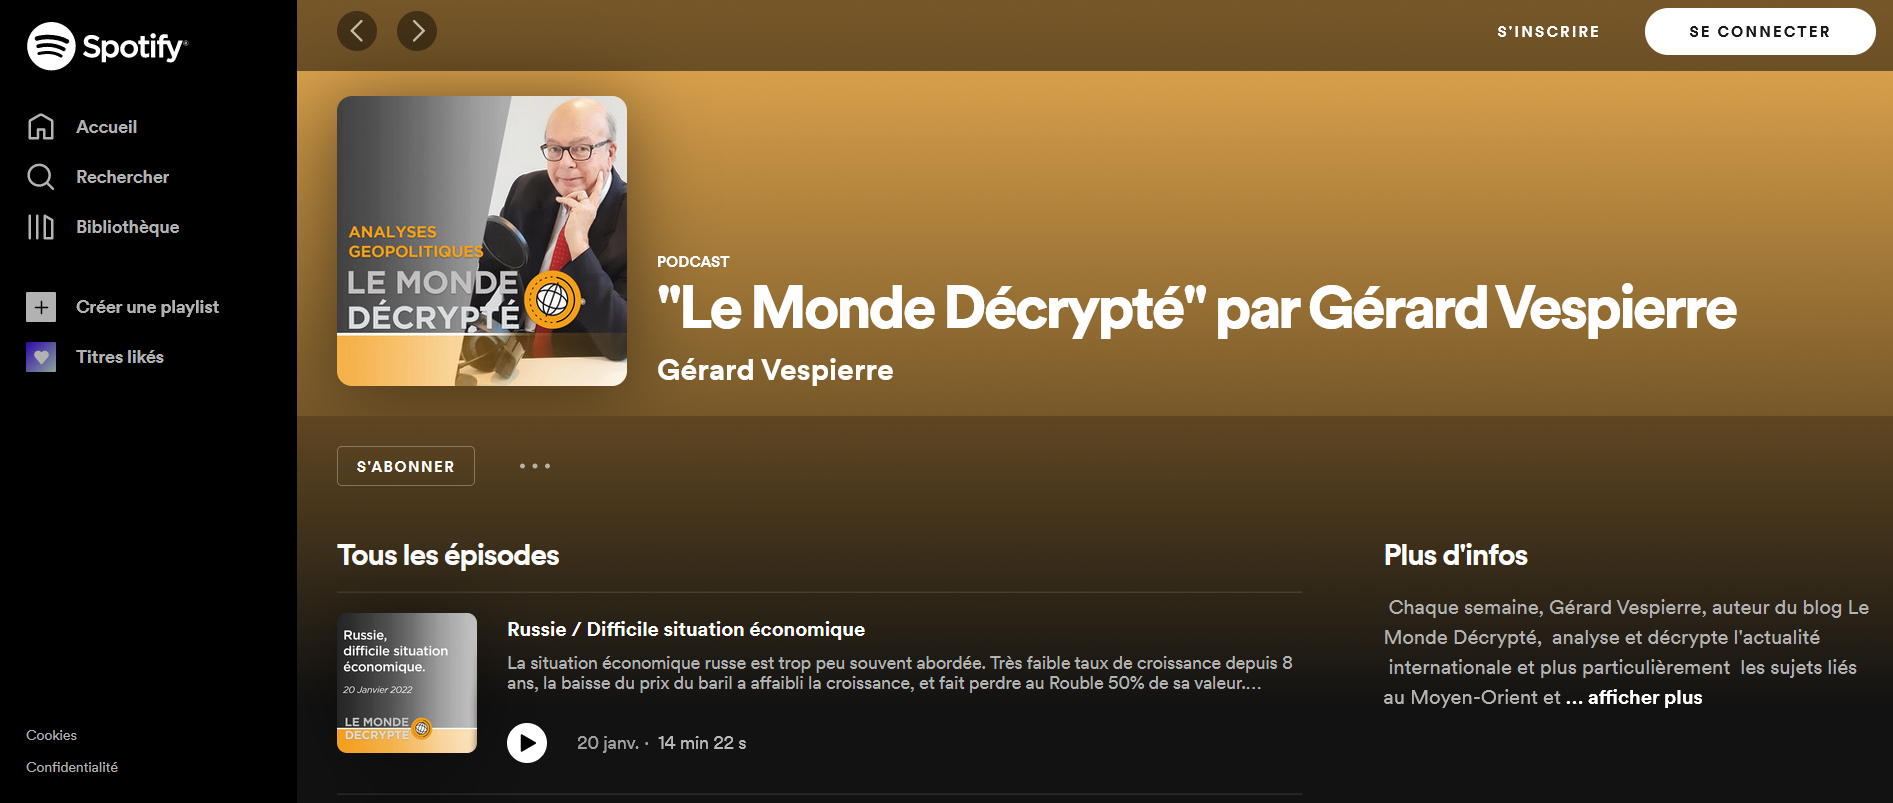 accompagnement podcast youtube youtubeur agence communication 95-66 geopolitique gerard vespierre